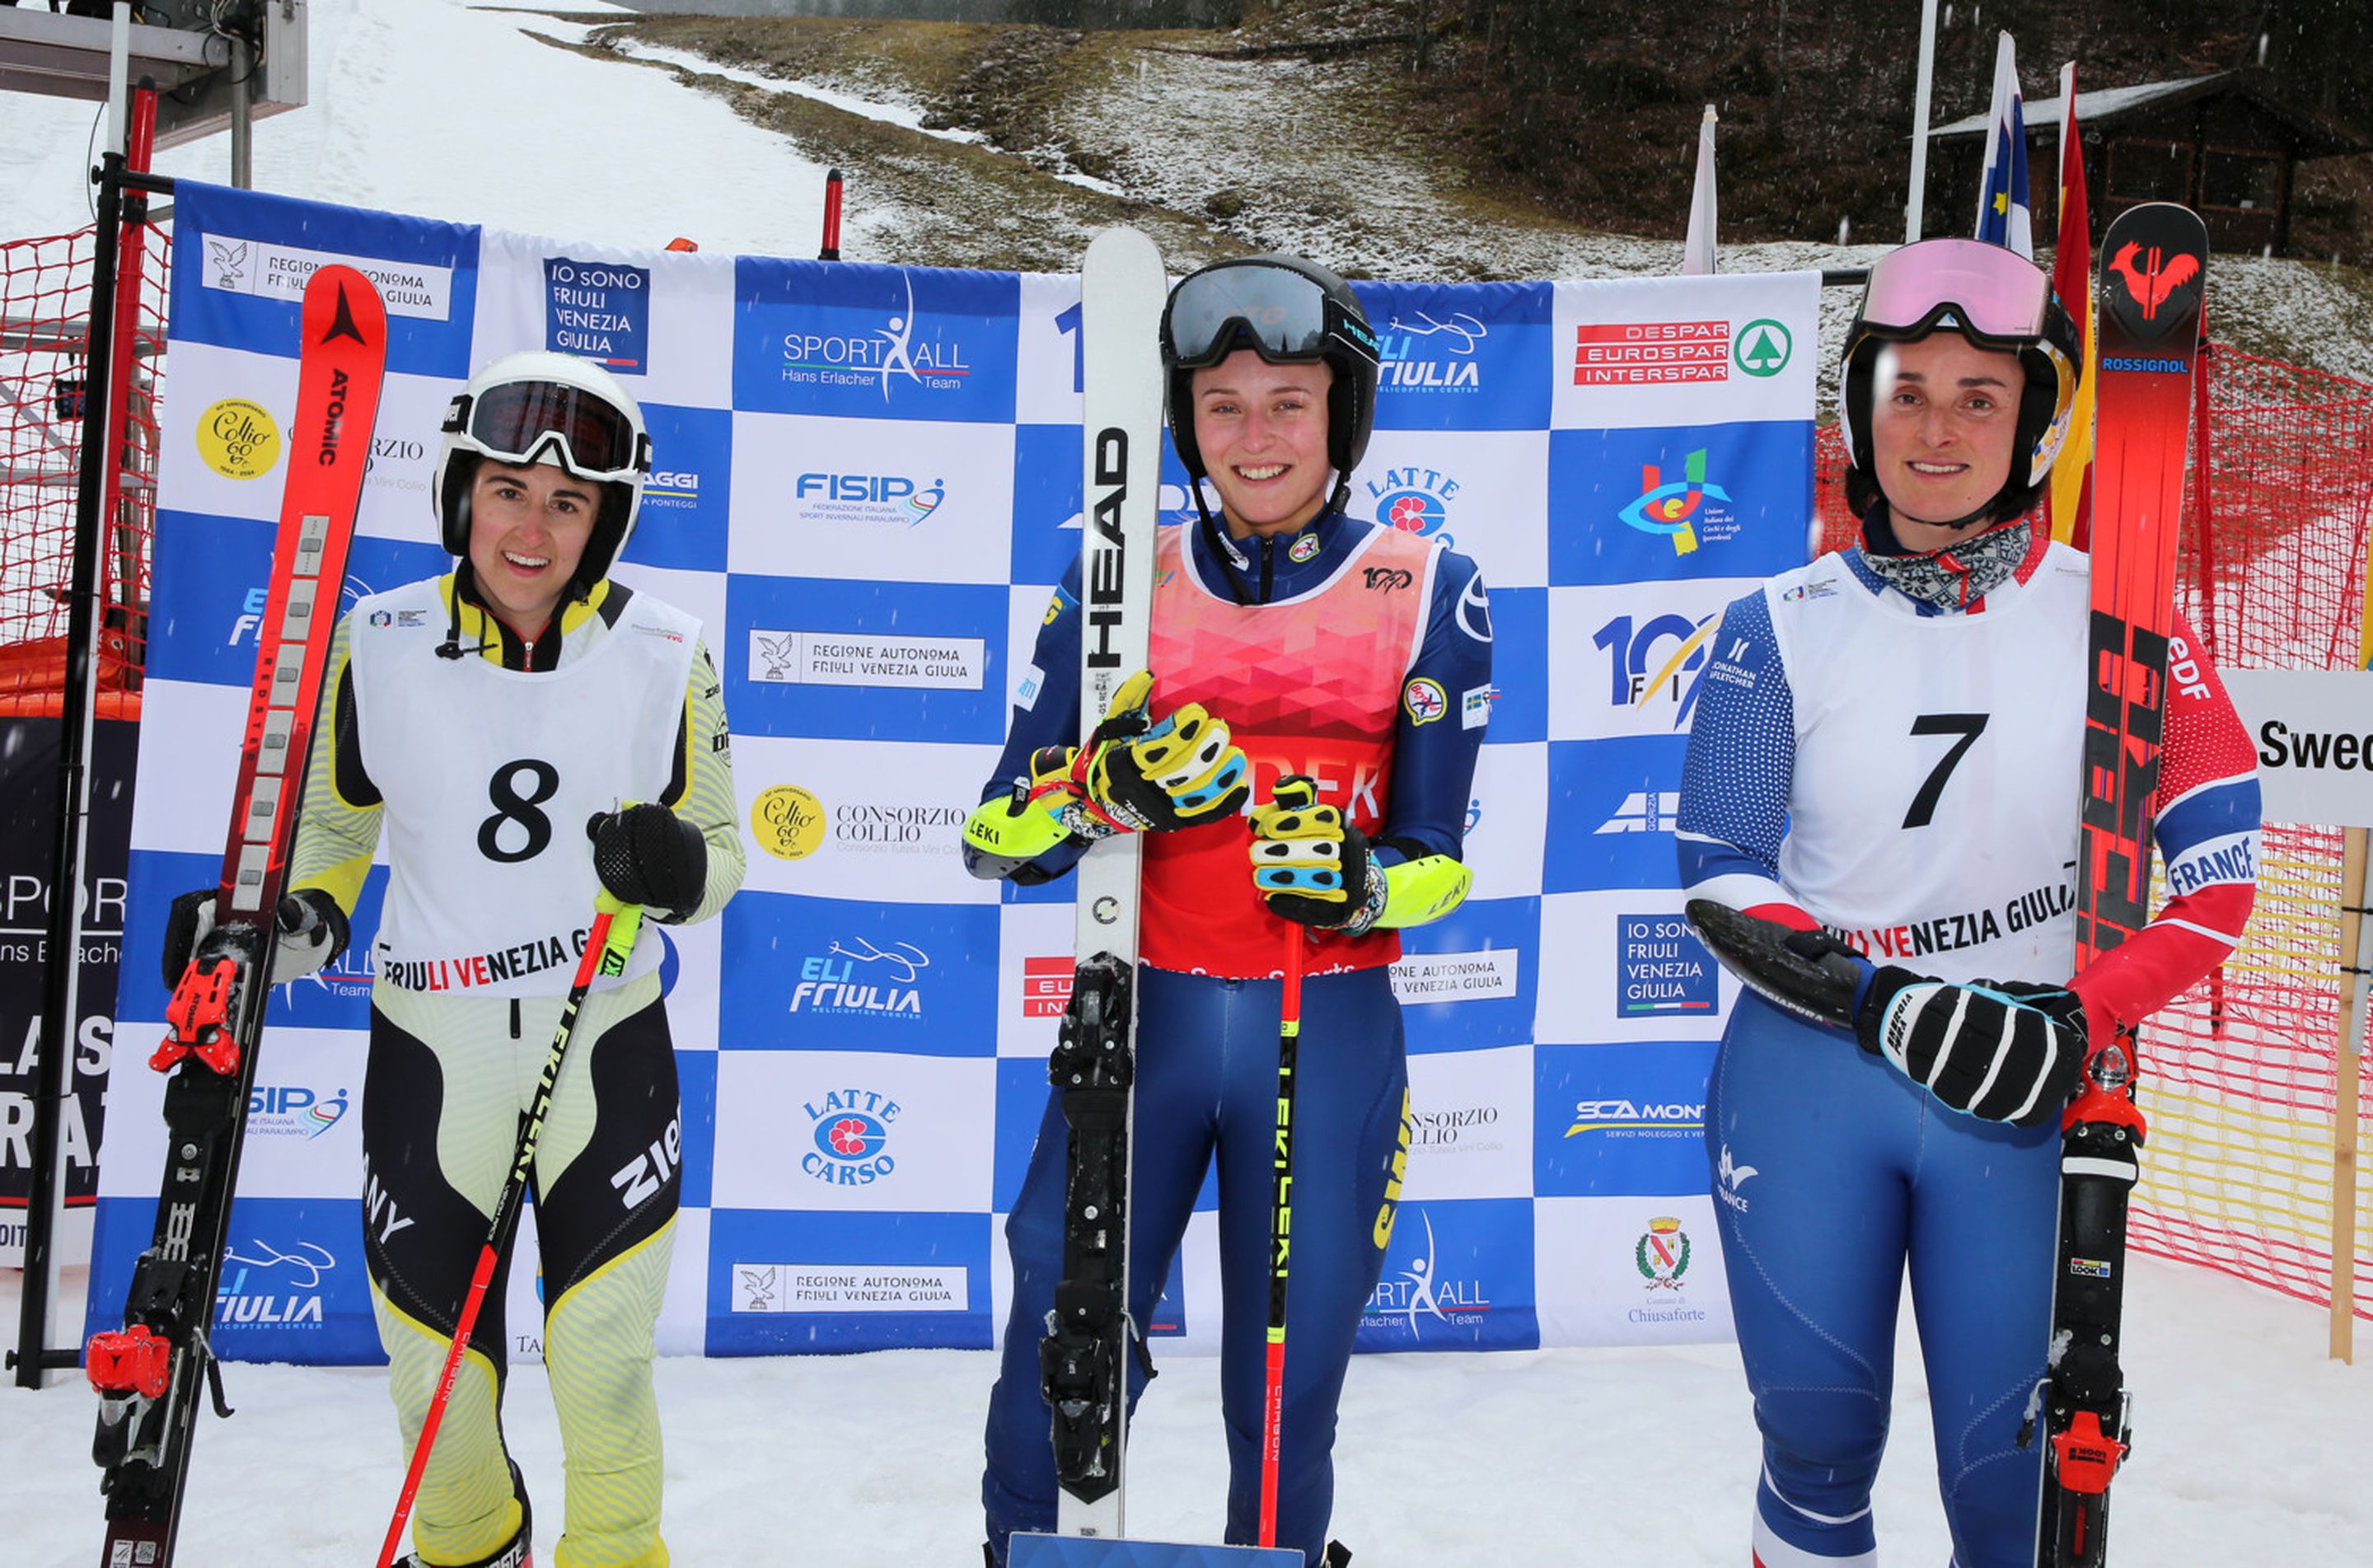 Anna-Maria Rieder (GER), Ebba Aarsjoe (SWE) and Marie Bochet (FRA) in the finish area of the last giant slalom in Sella Nevea